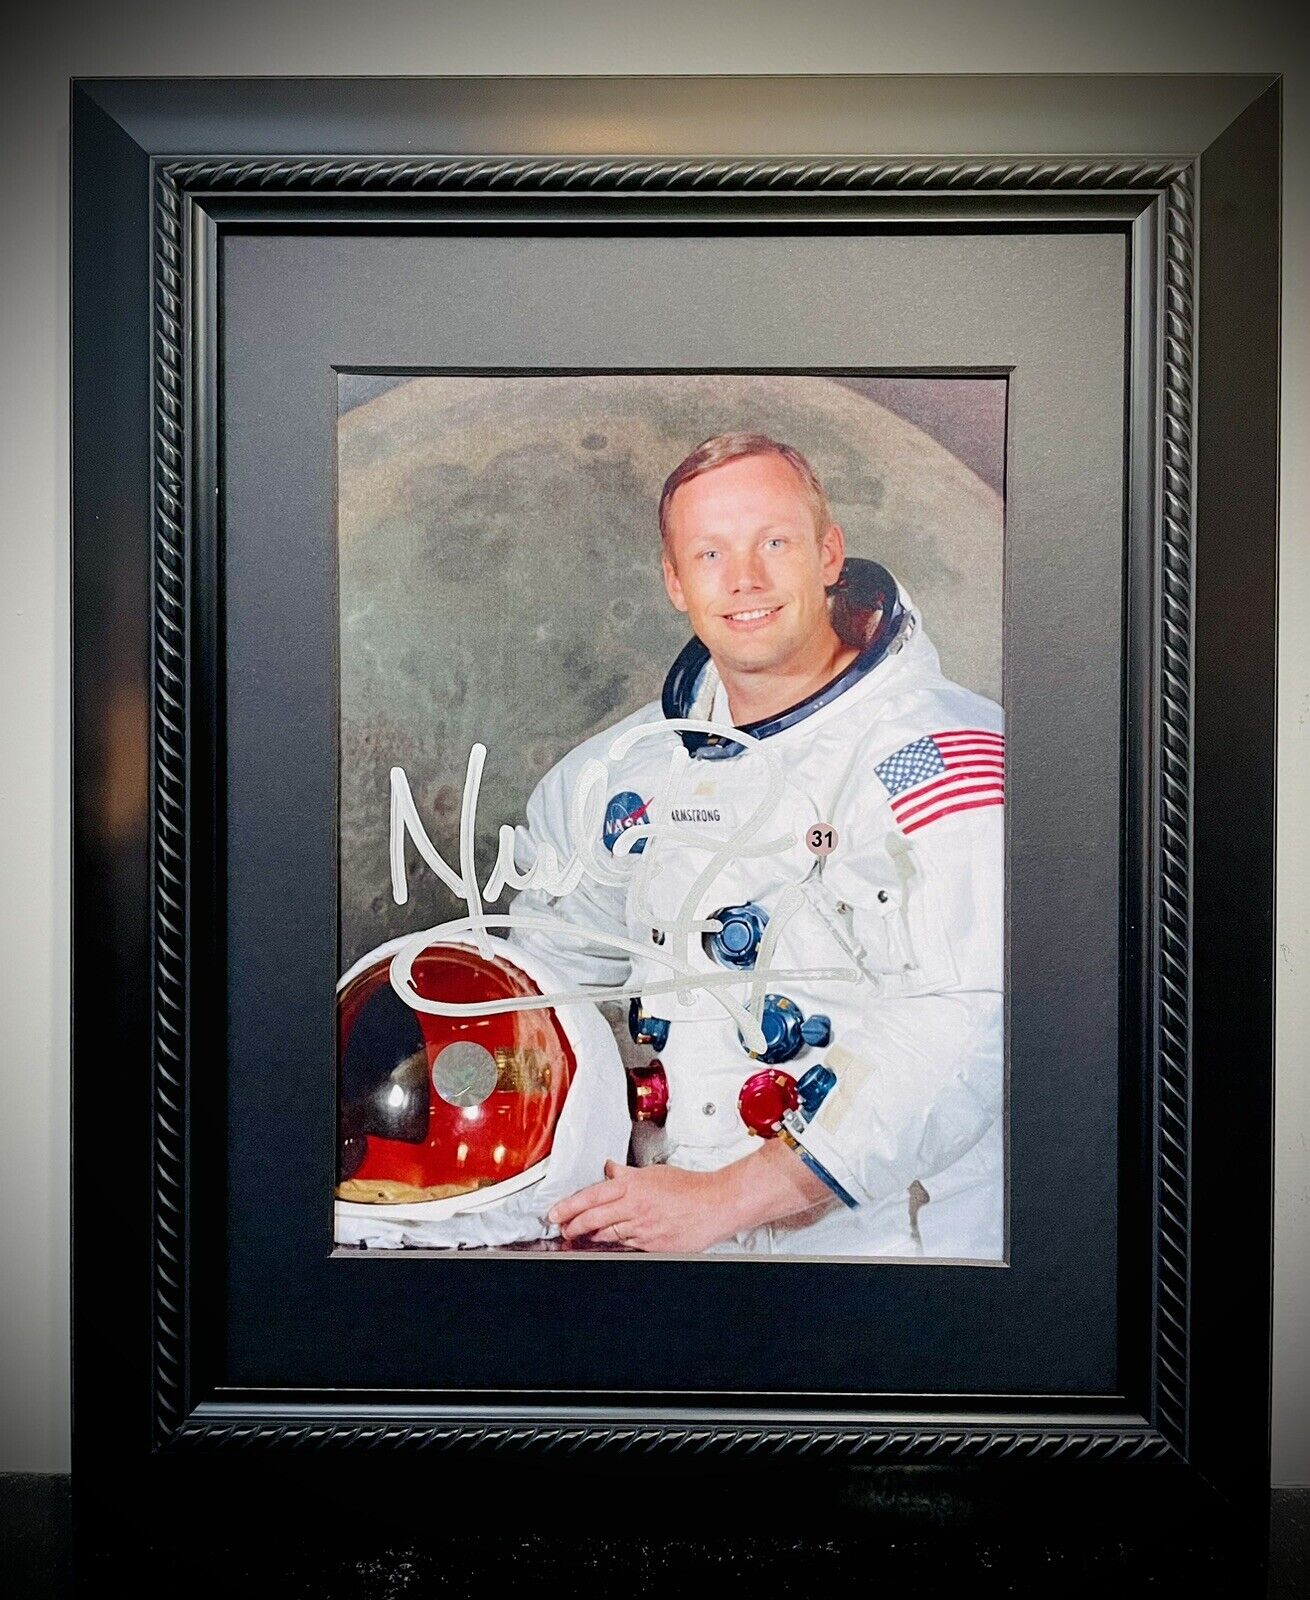 NEIL ARMSTRONG NASA Apollo 11 Autographed Signed Photo comes With COA & Framed